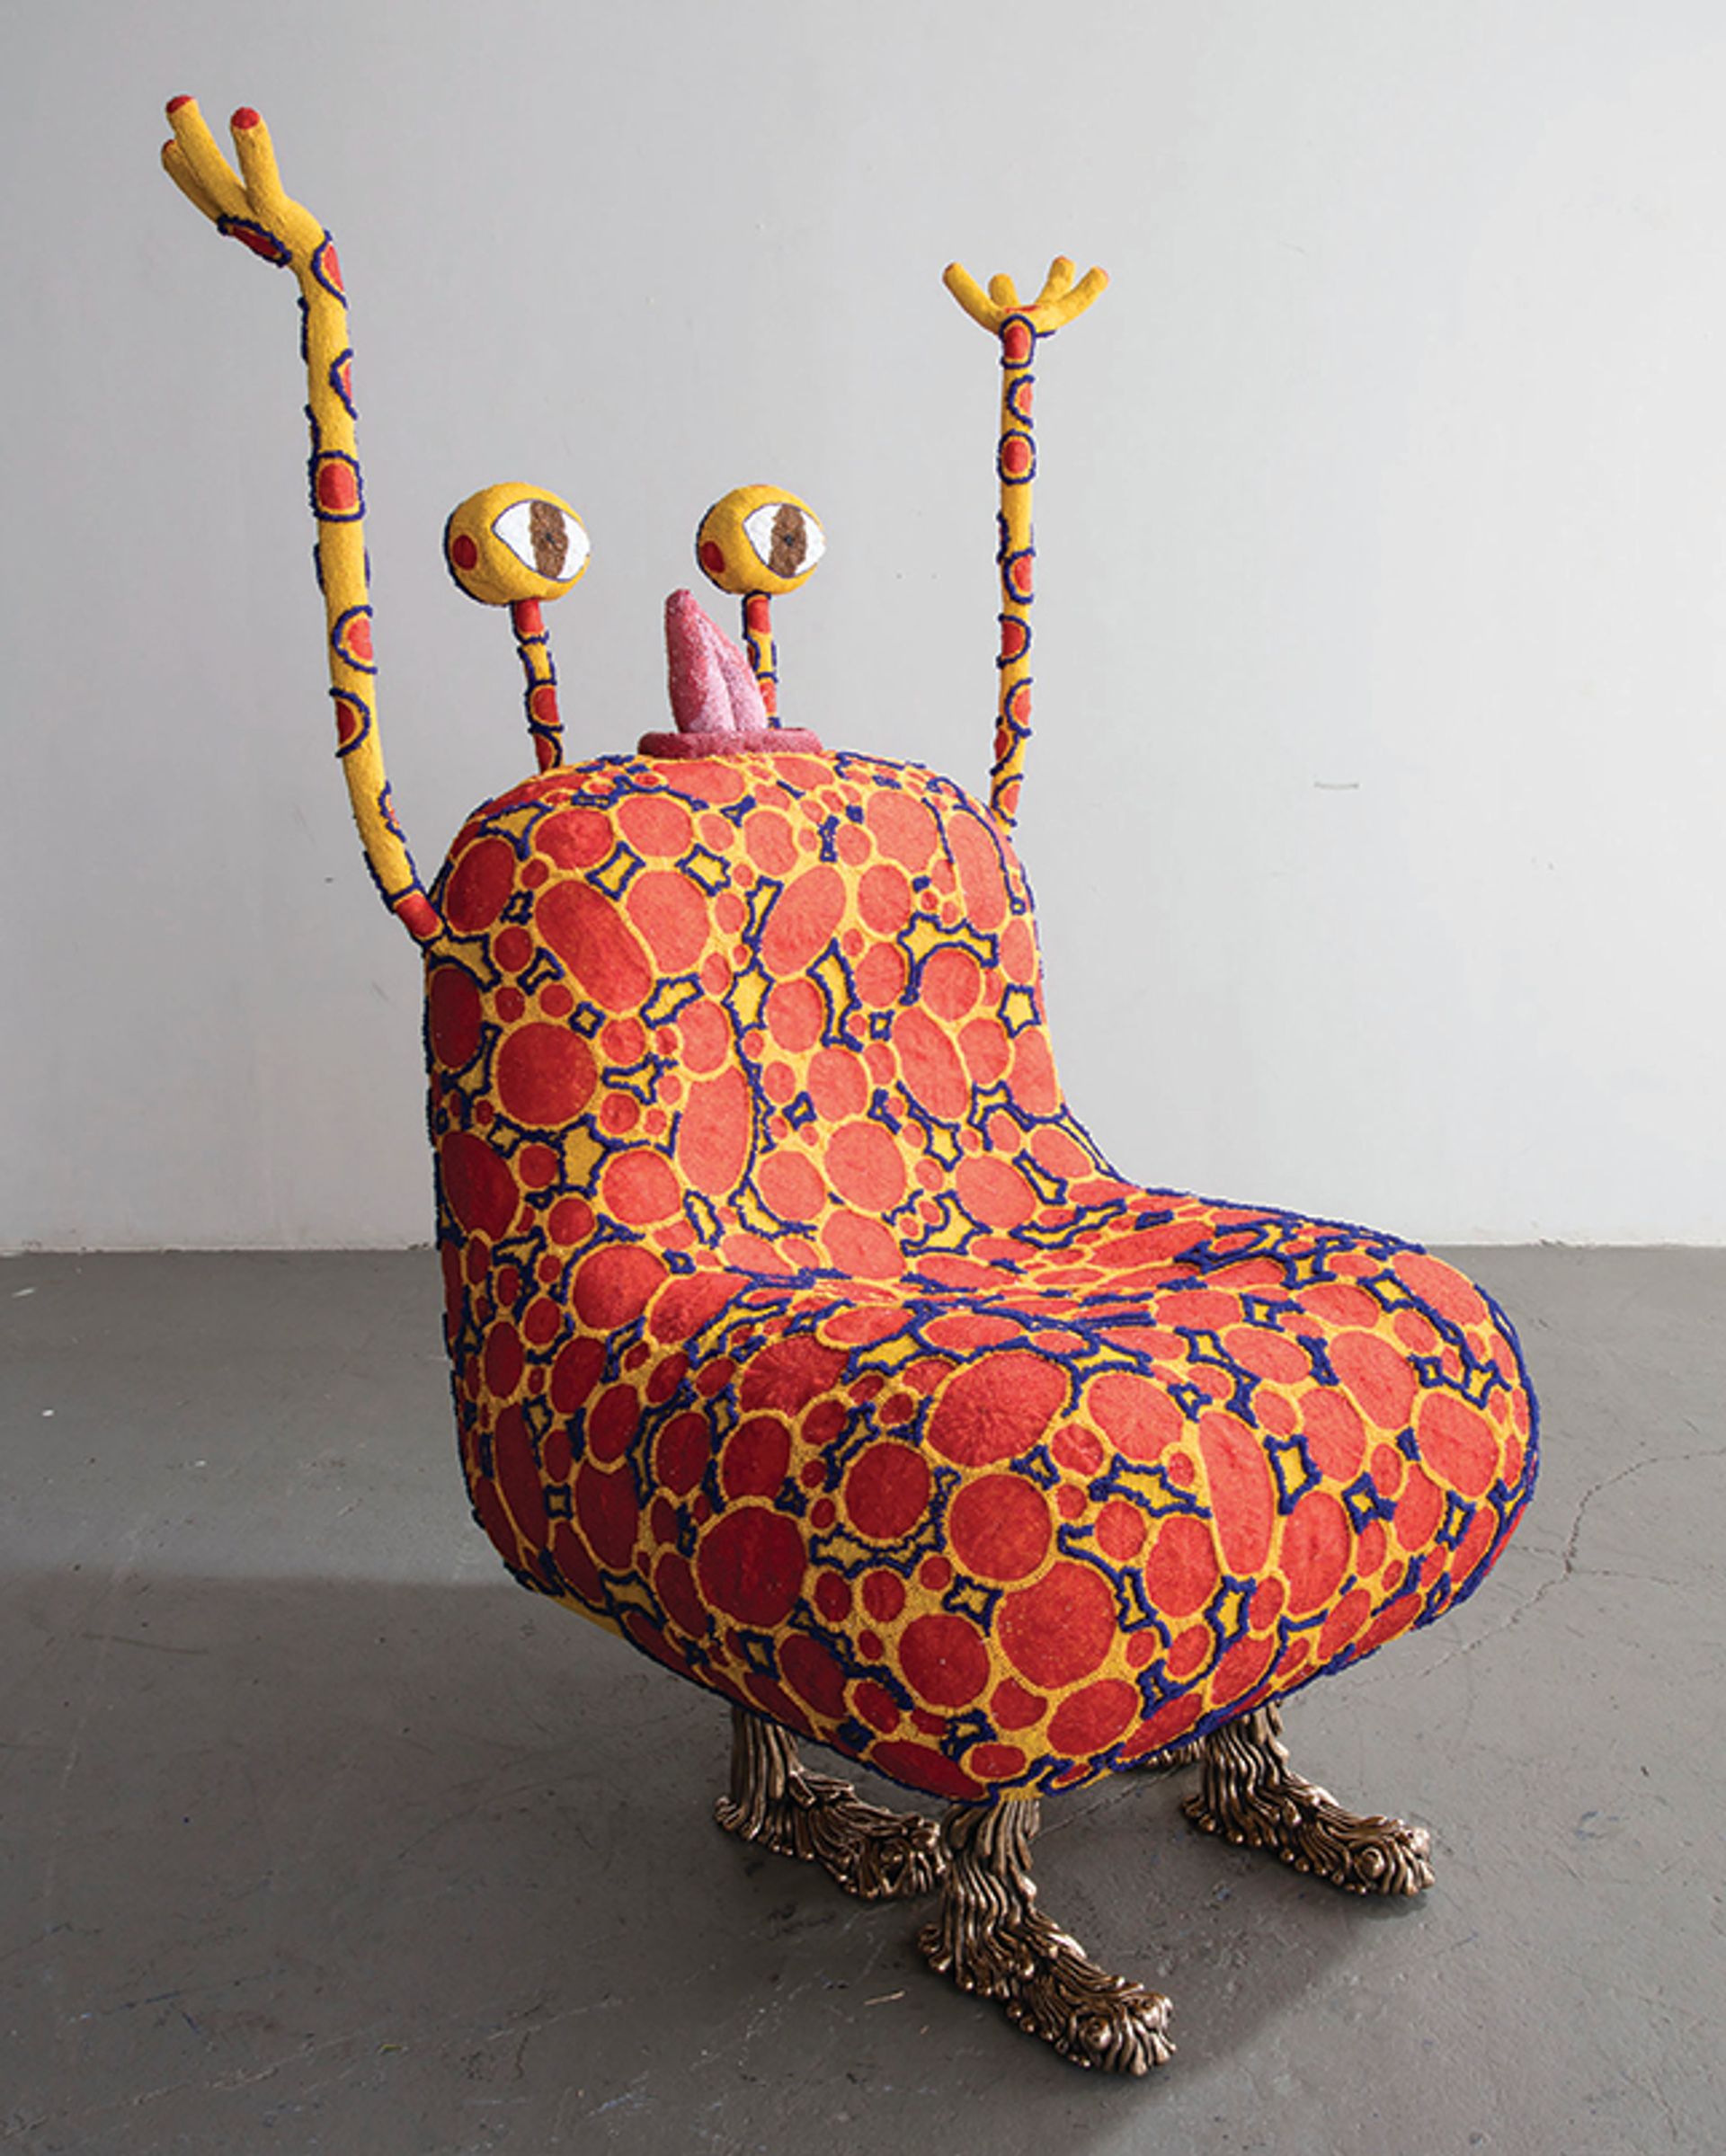 Spotley Cru, a beaded and bronze chair by the Haas Brothers (2017). Courtesy of Marianne Boesky